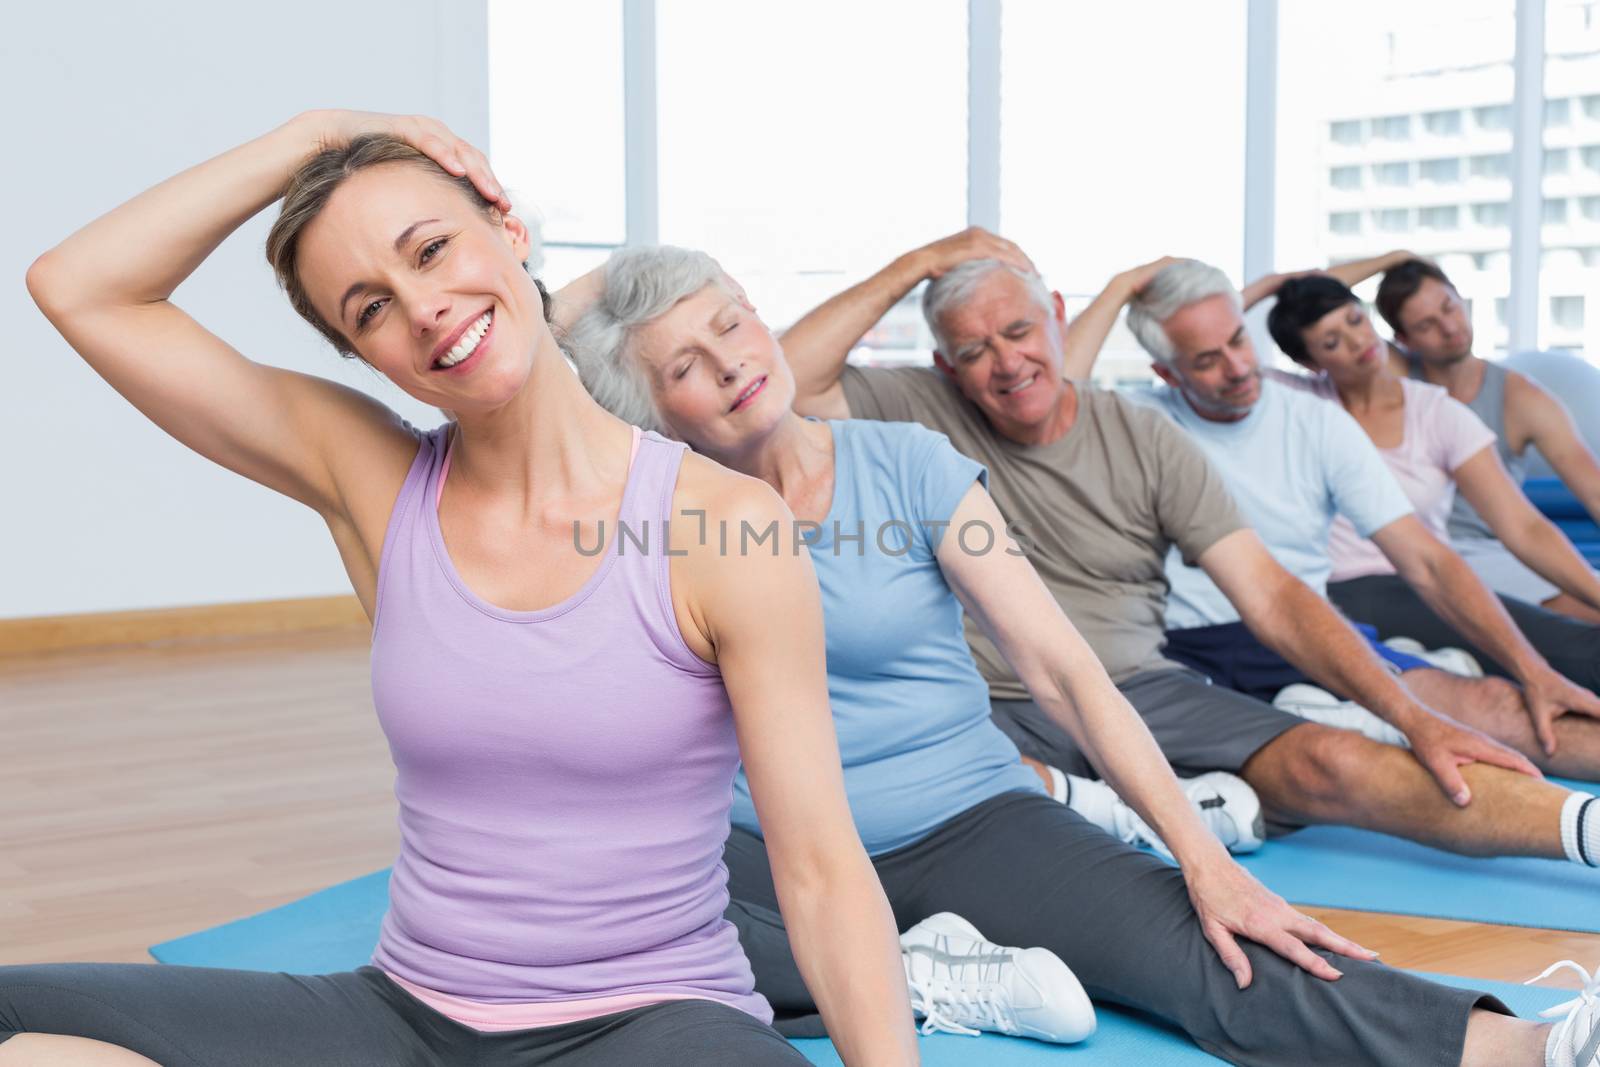 Class stretching neck in row at yoga class by Wavebreakmedia